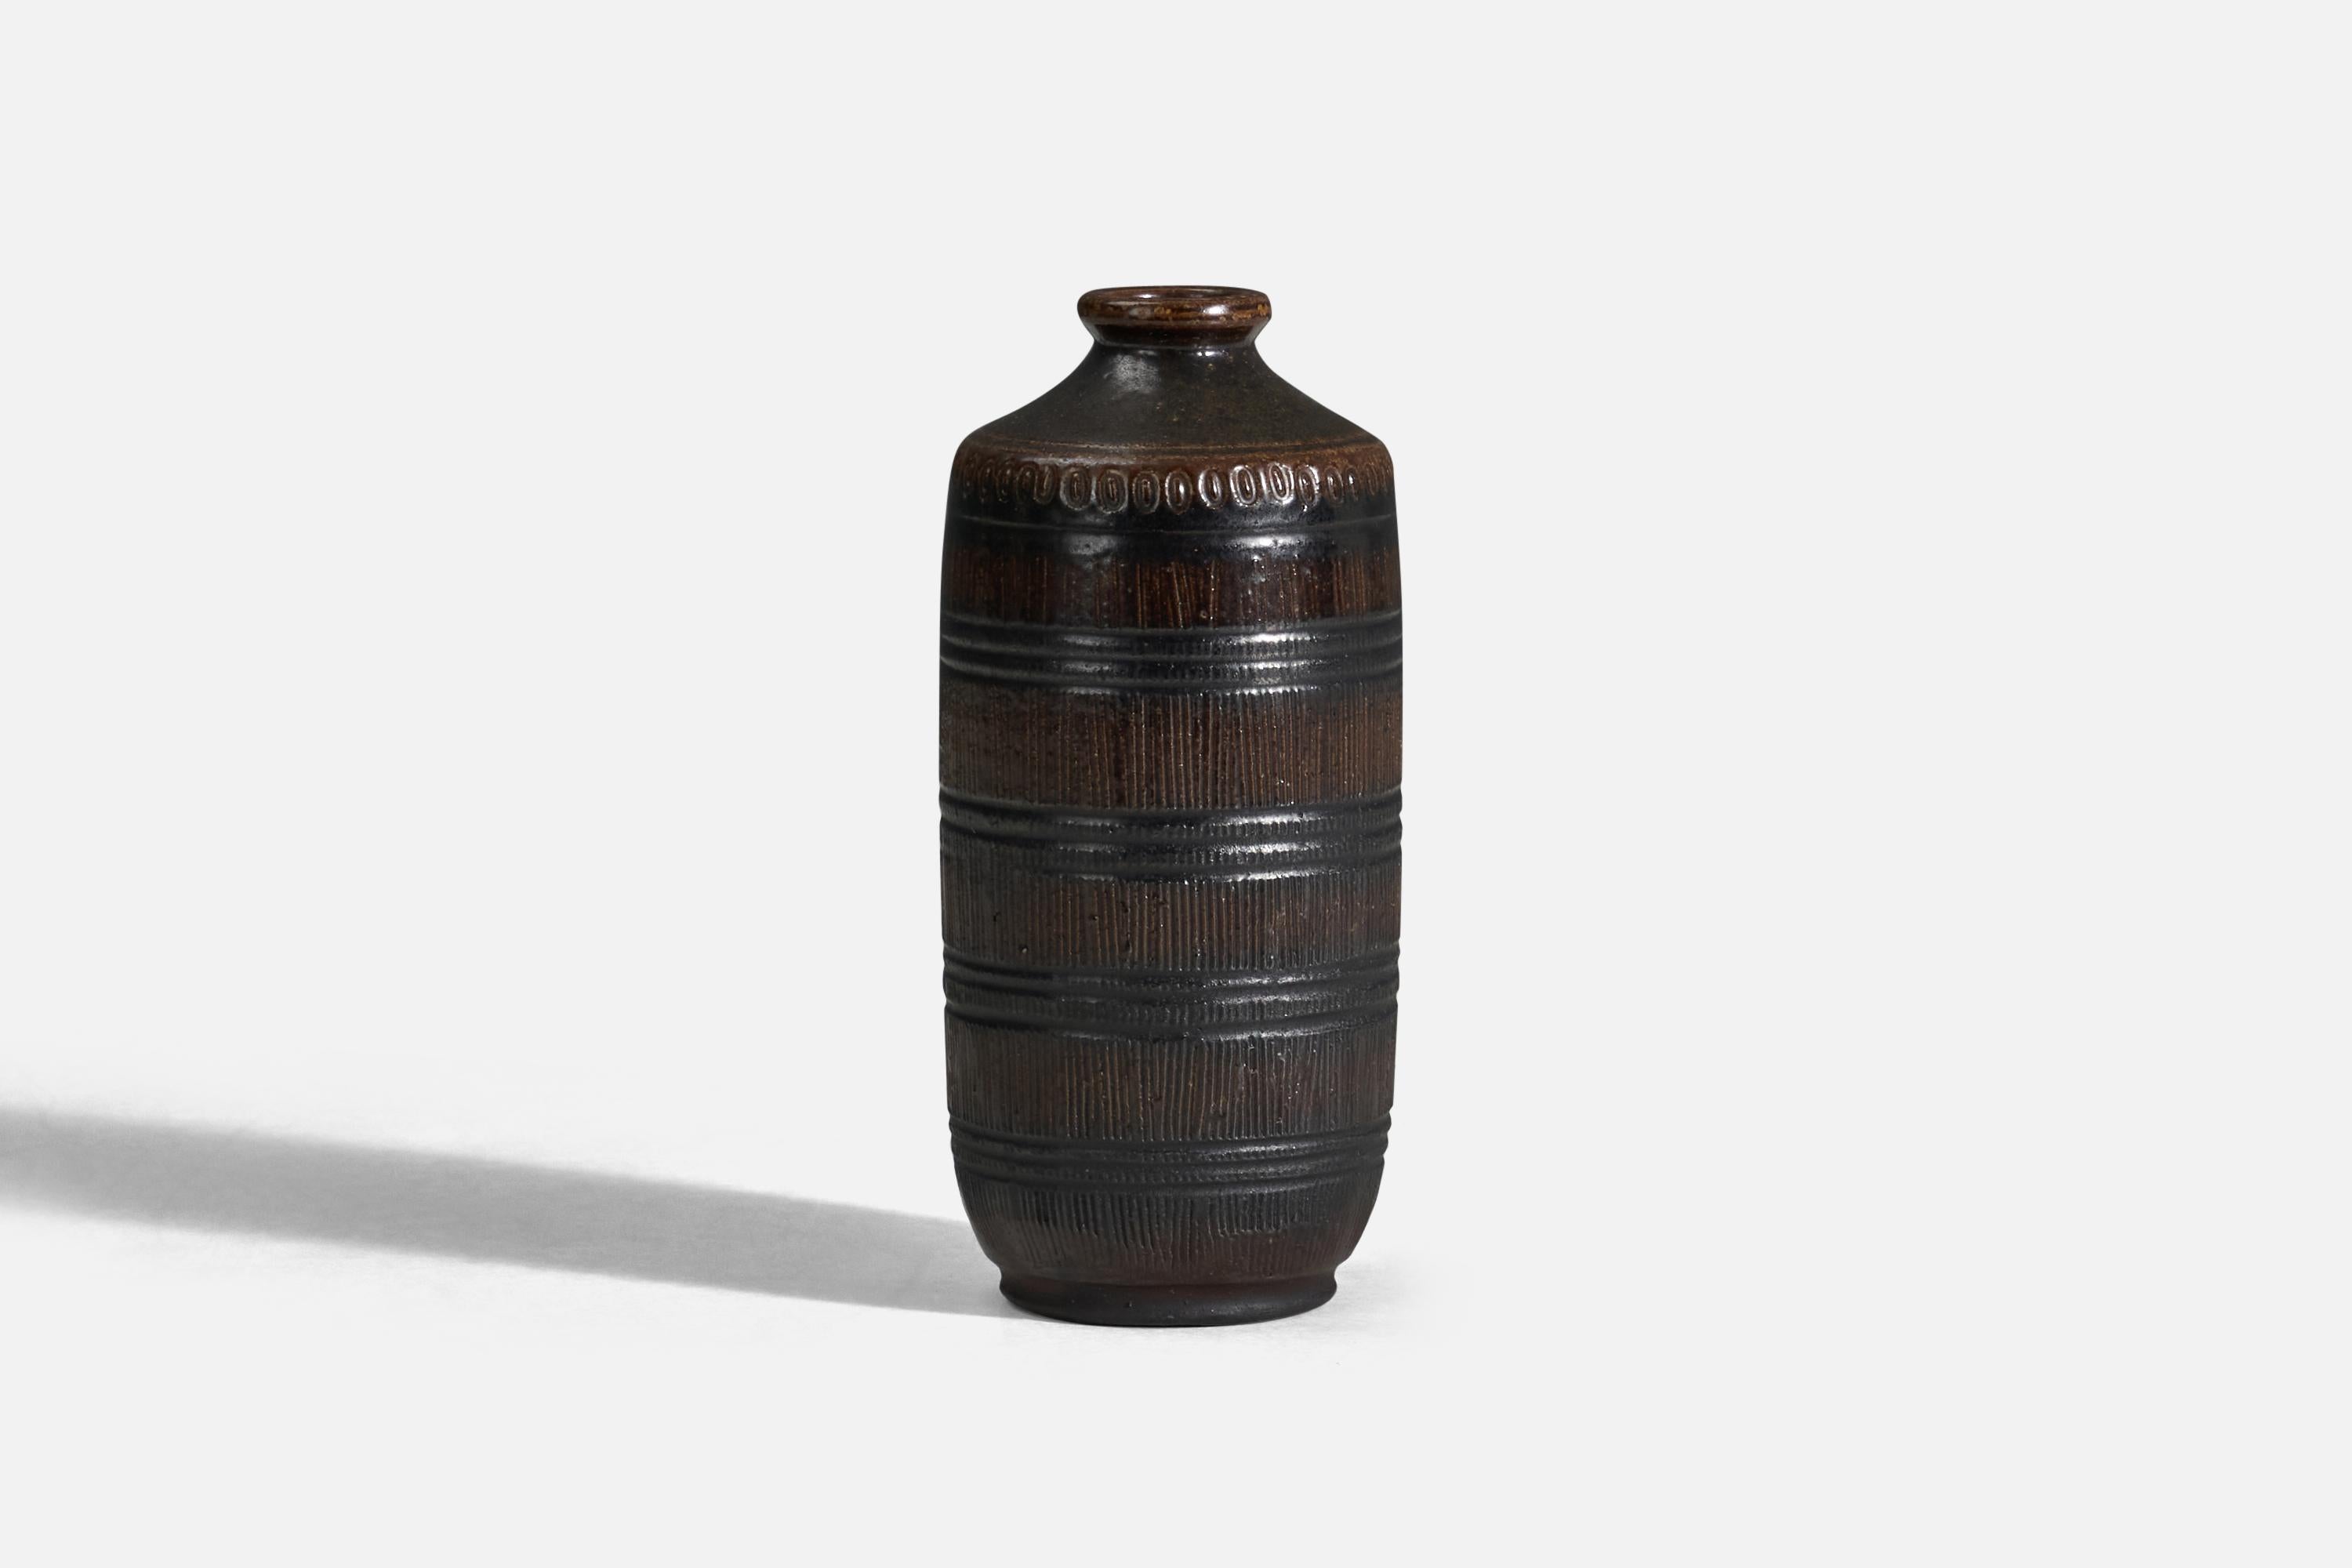 A black and brown glazed stoneware vase designed by Arthur Andersson and produced by Wallåkra, Sweden, 1950s.